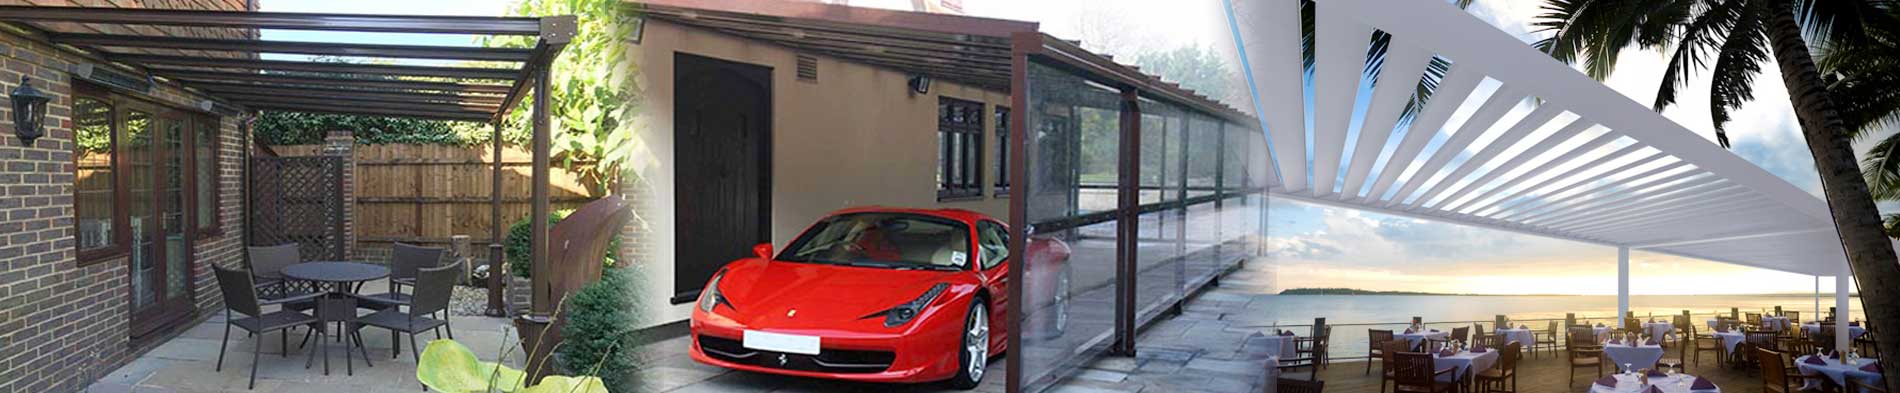 Poly-canopies available in High Wycombe